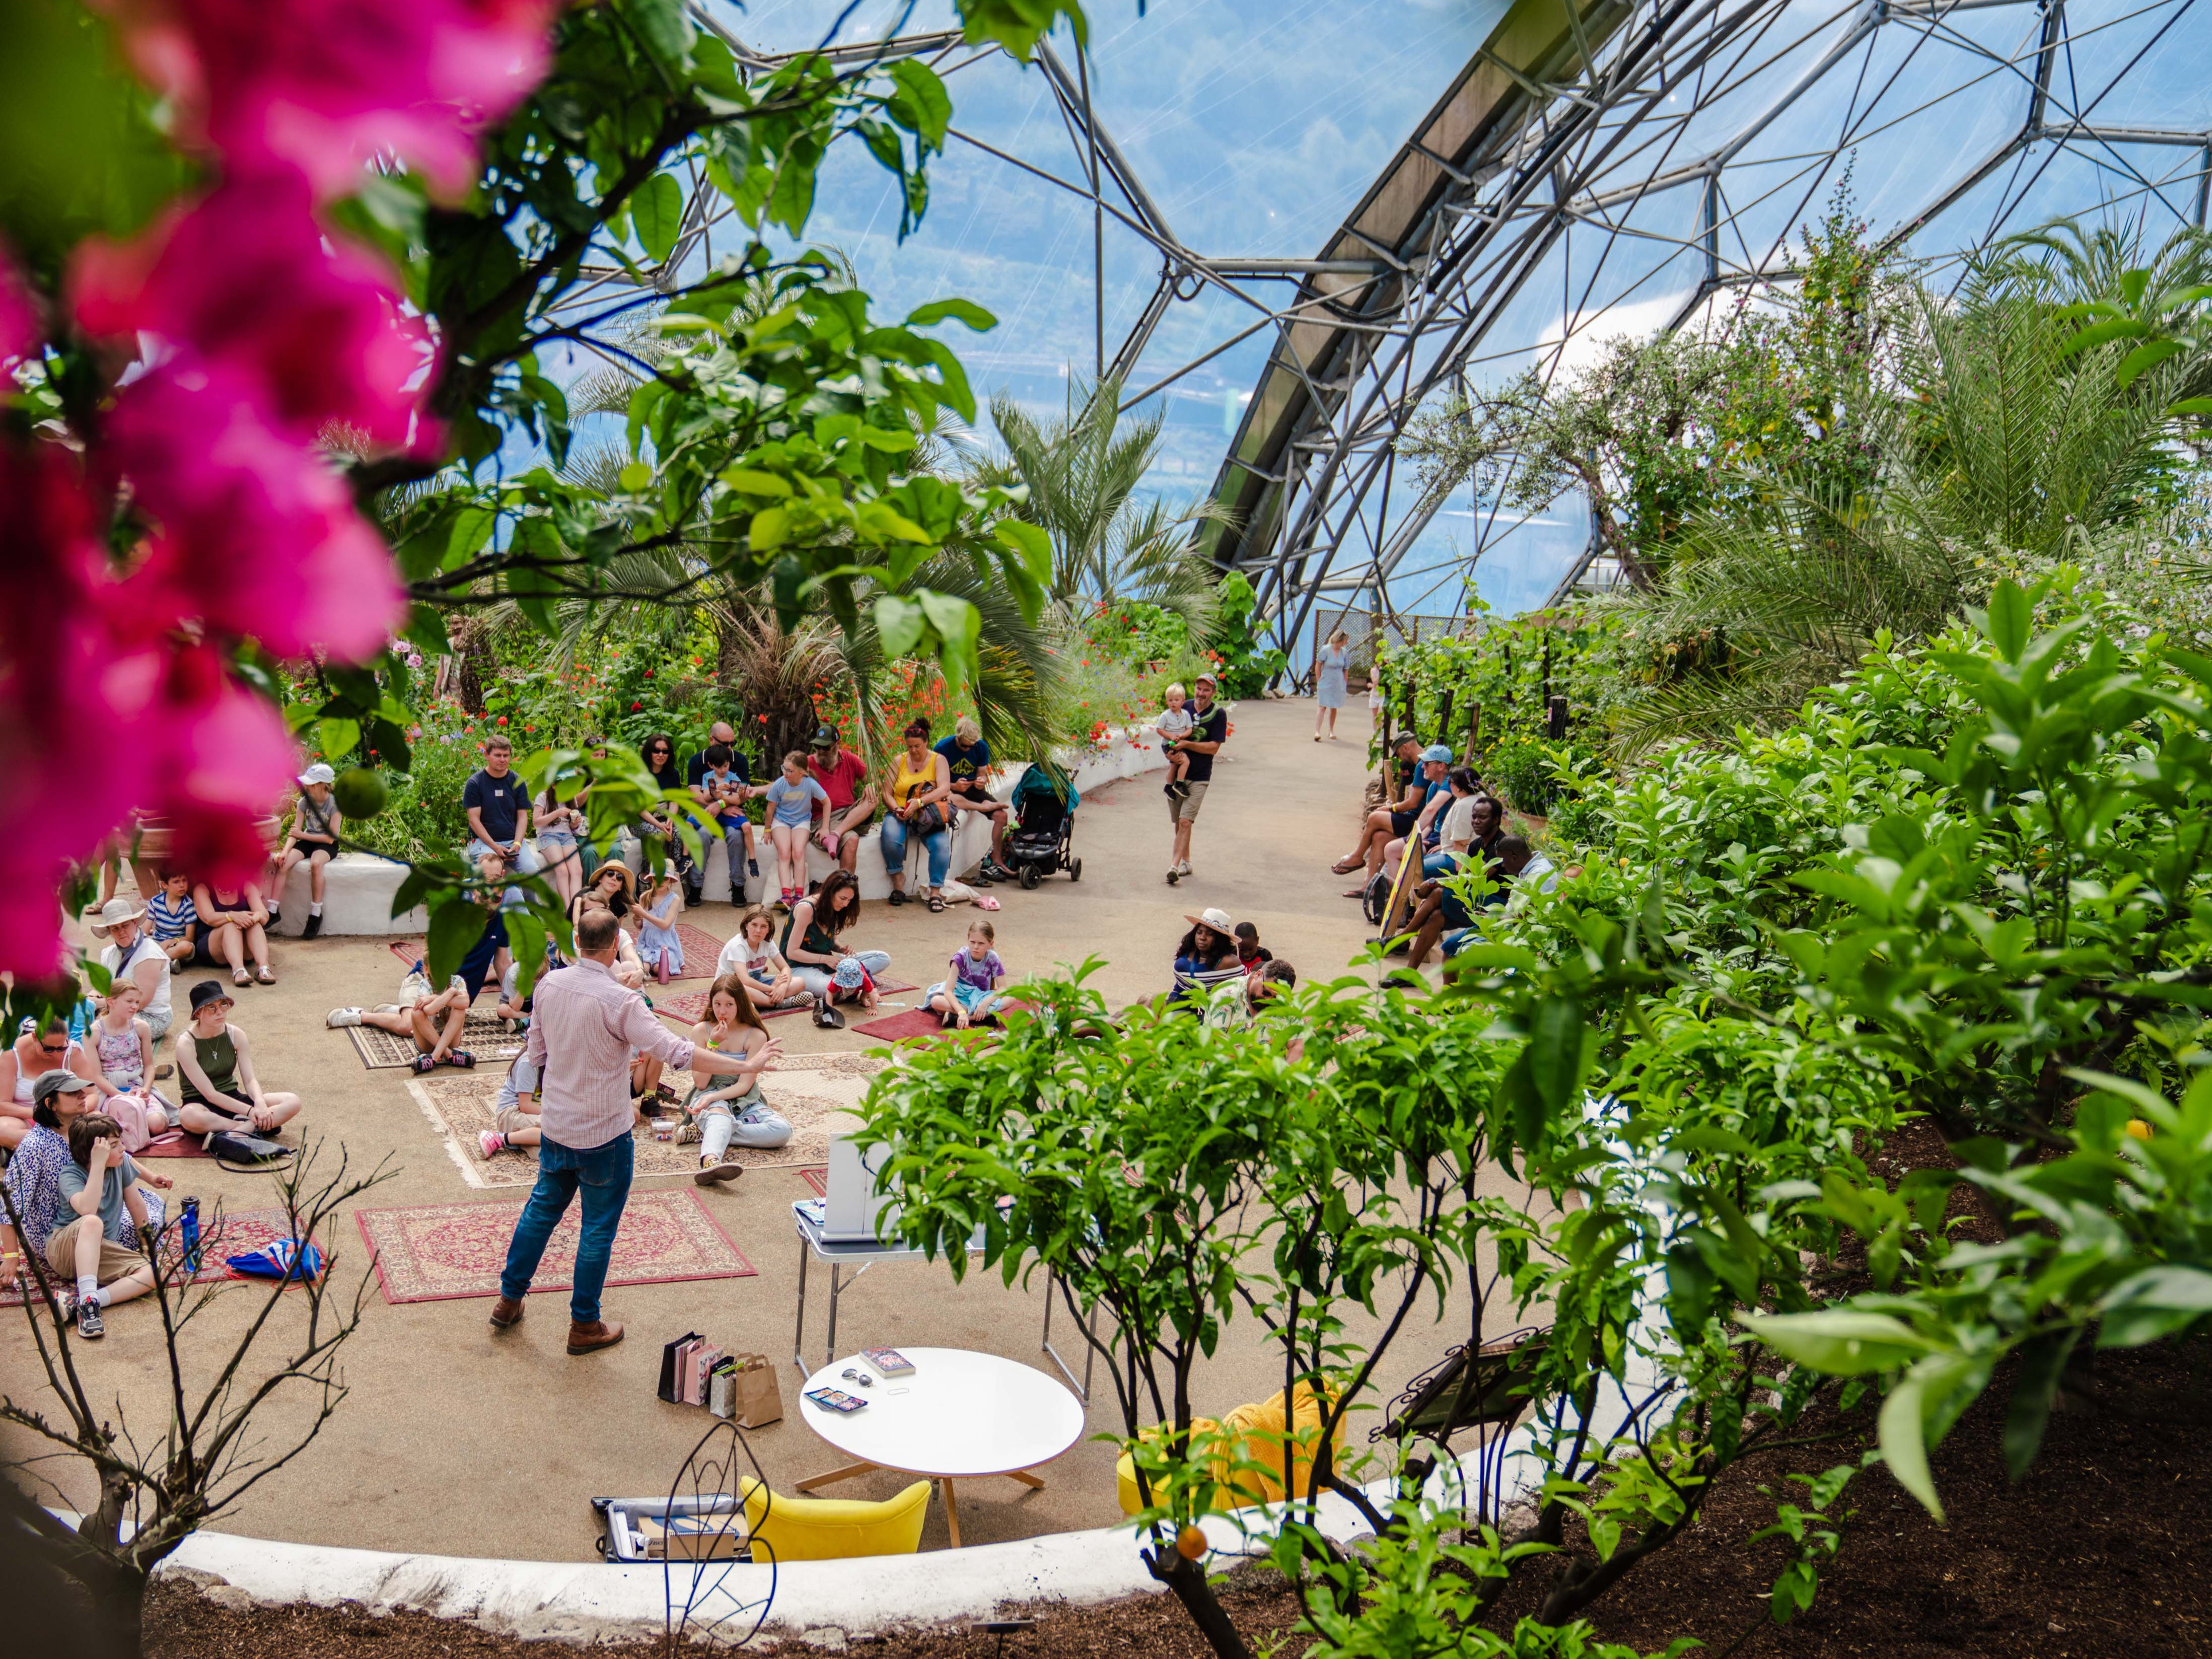 The Eden Project in Cornwall is running its Festival of Imagination over half-term, with music, art, literature and games